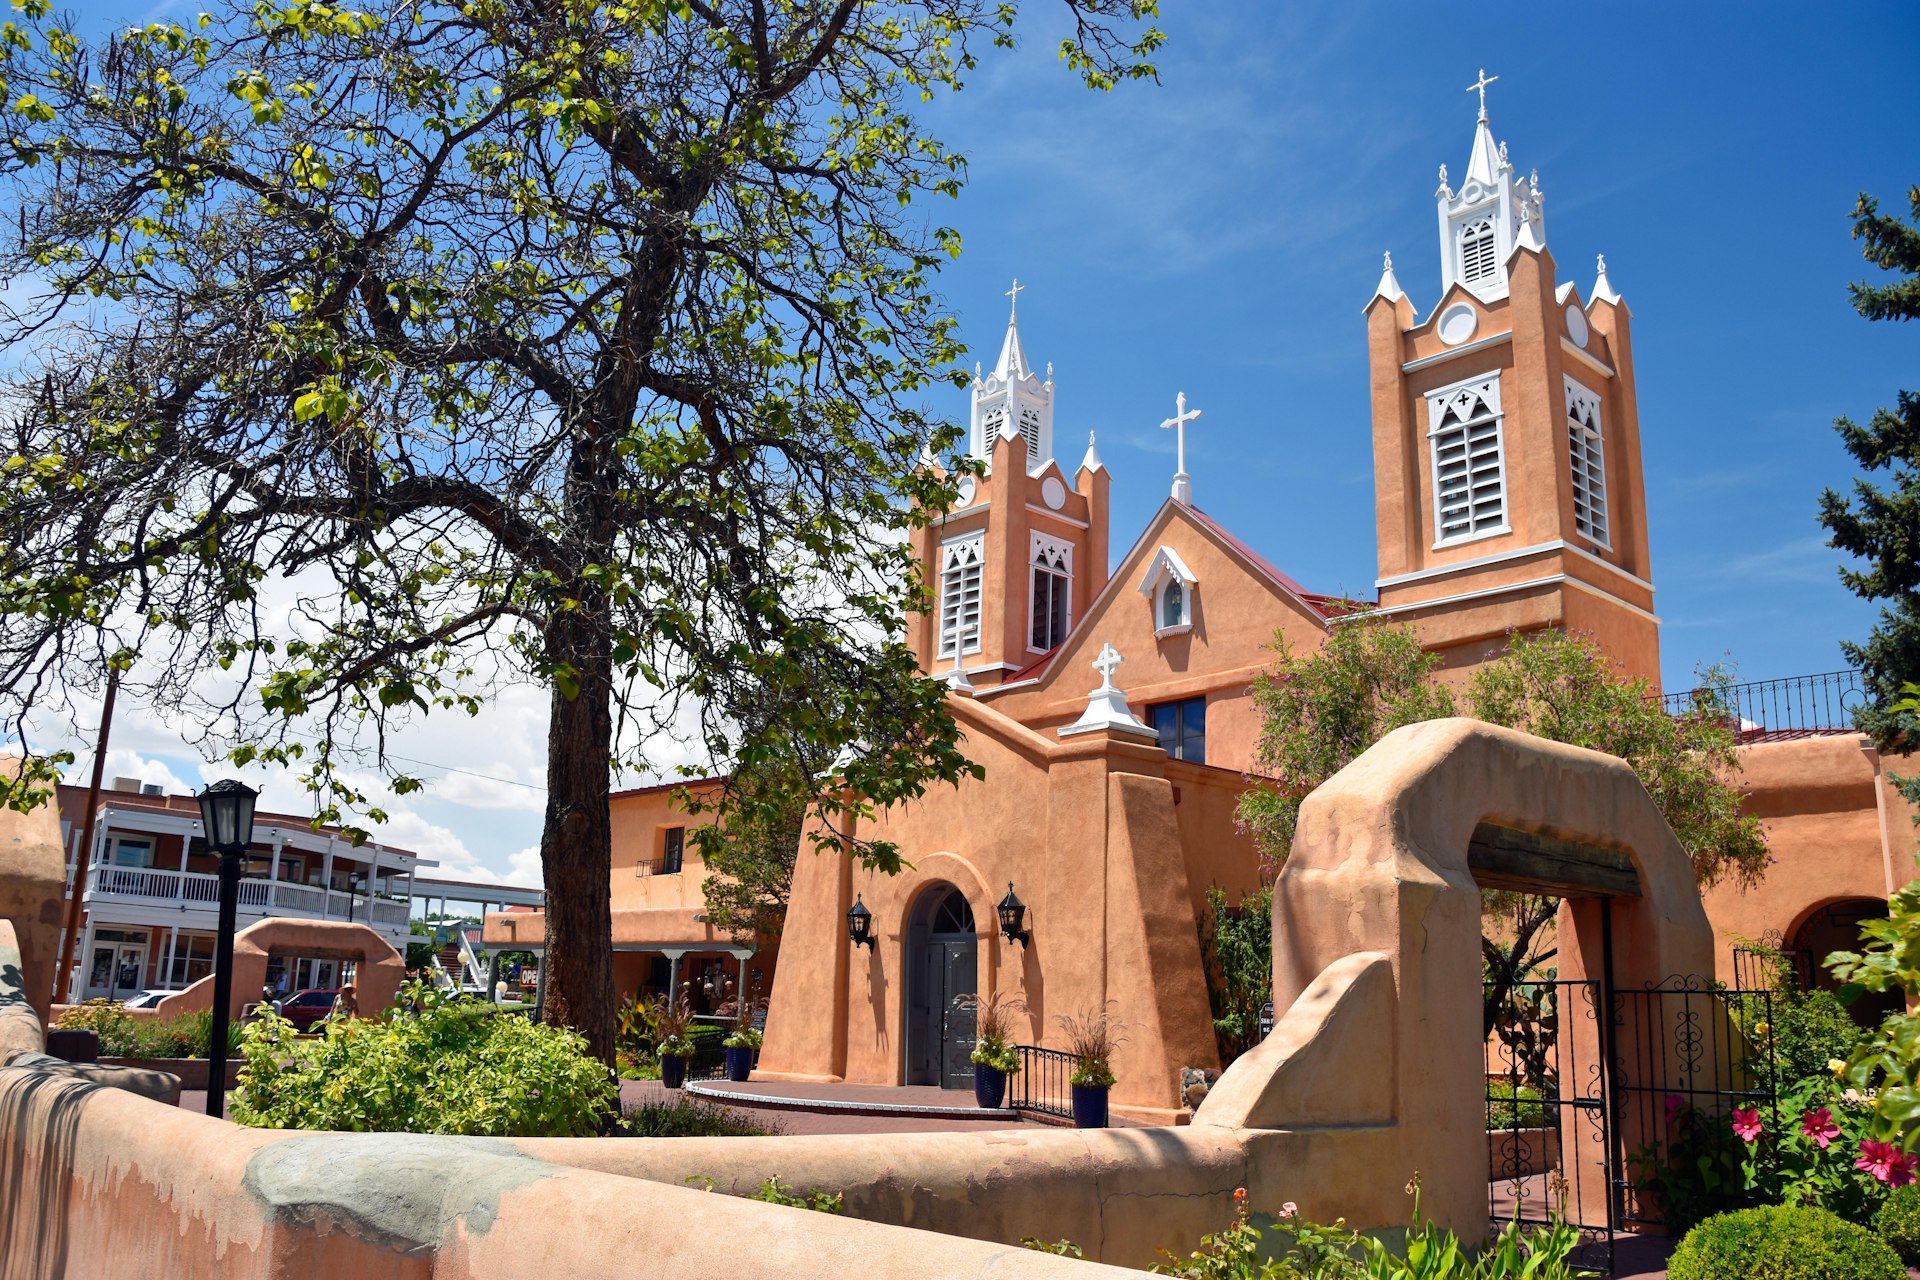 San Felipe De Neri Church, built in 1793 and the only building in Old Town Albuquerque New Mexico that dates back to the Spanish colonial period.